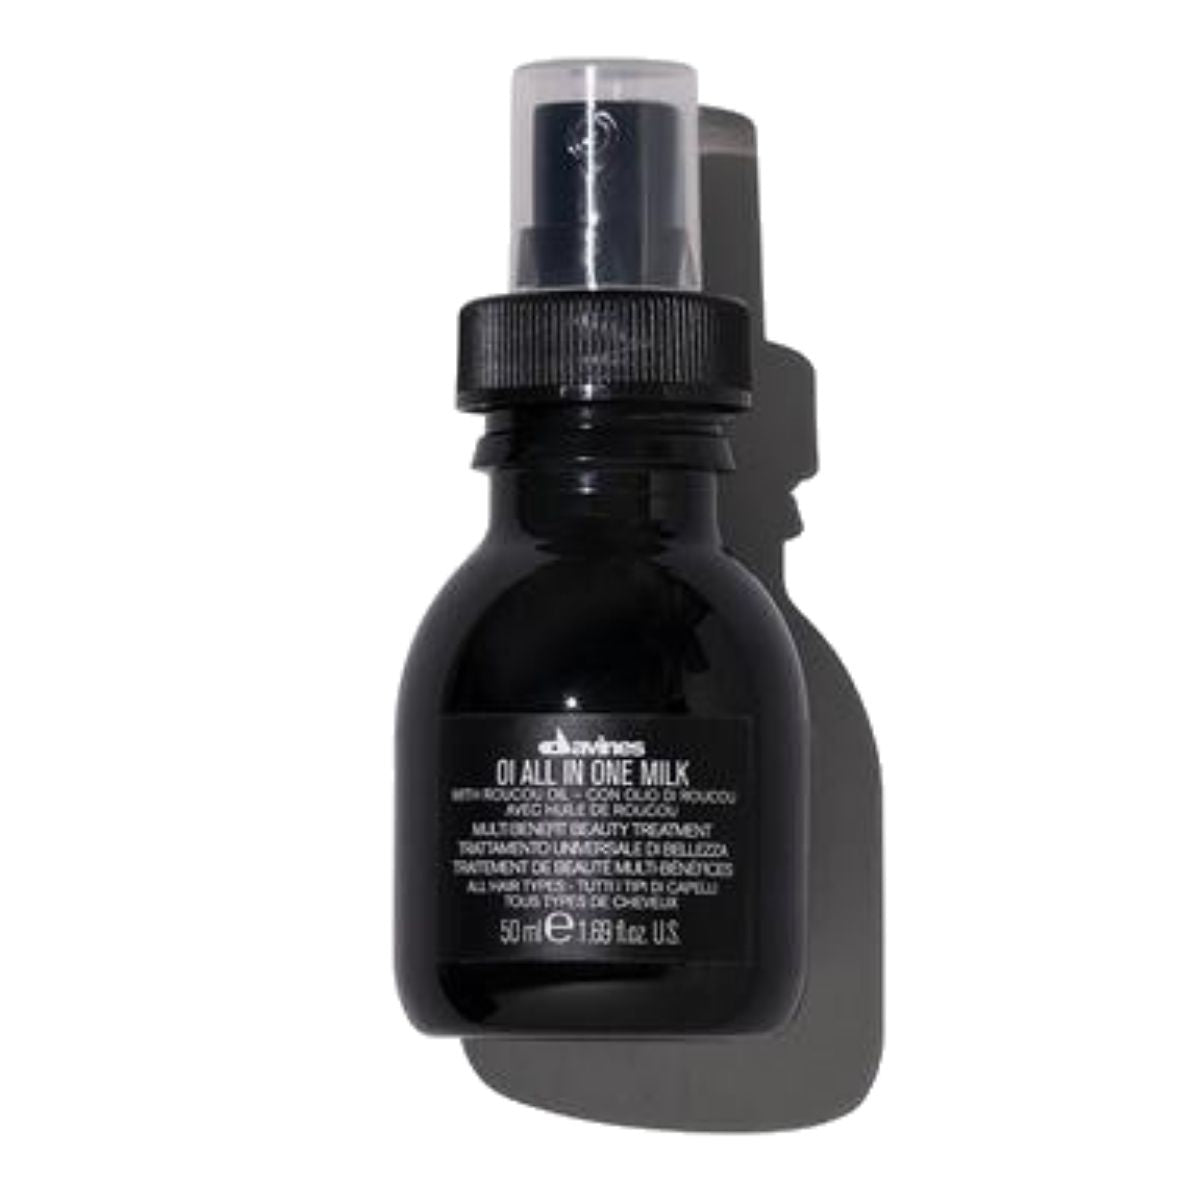 Davines Oi All In One Milk Travel Size.